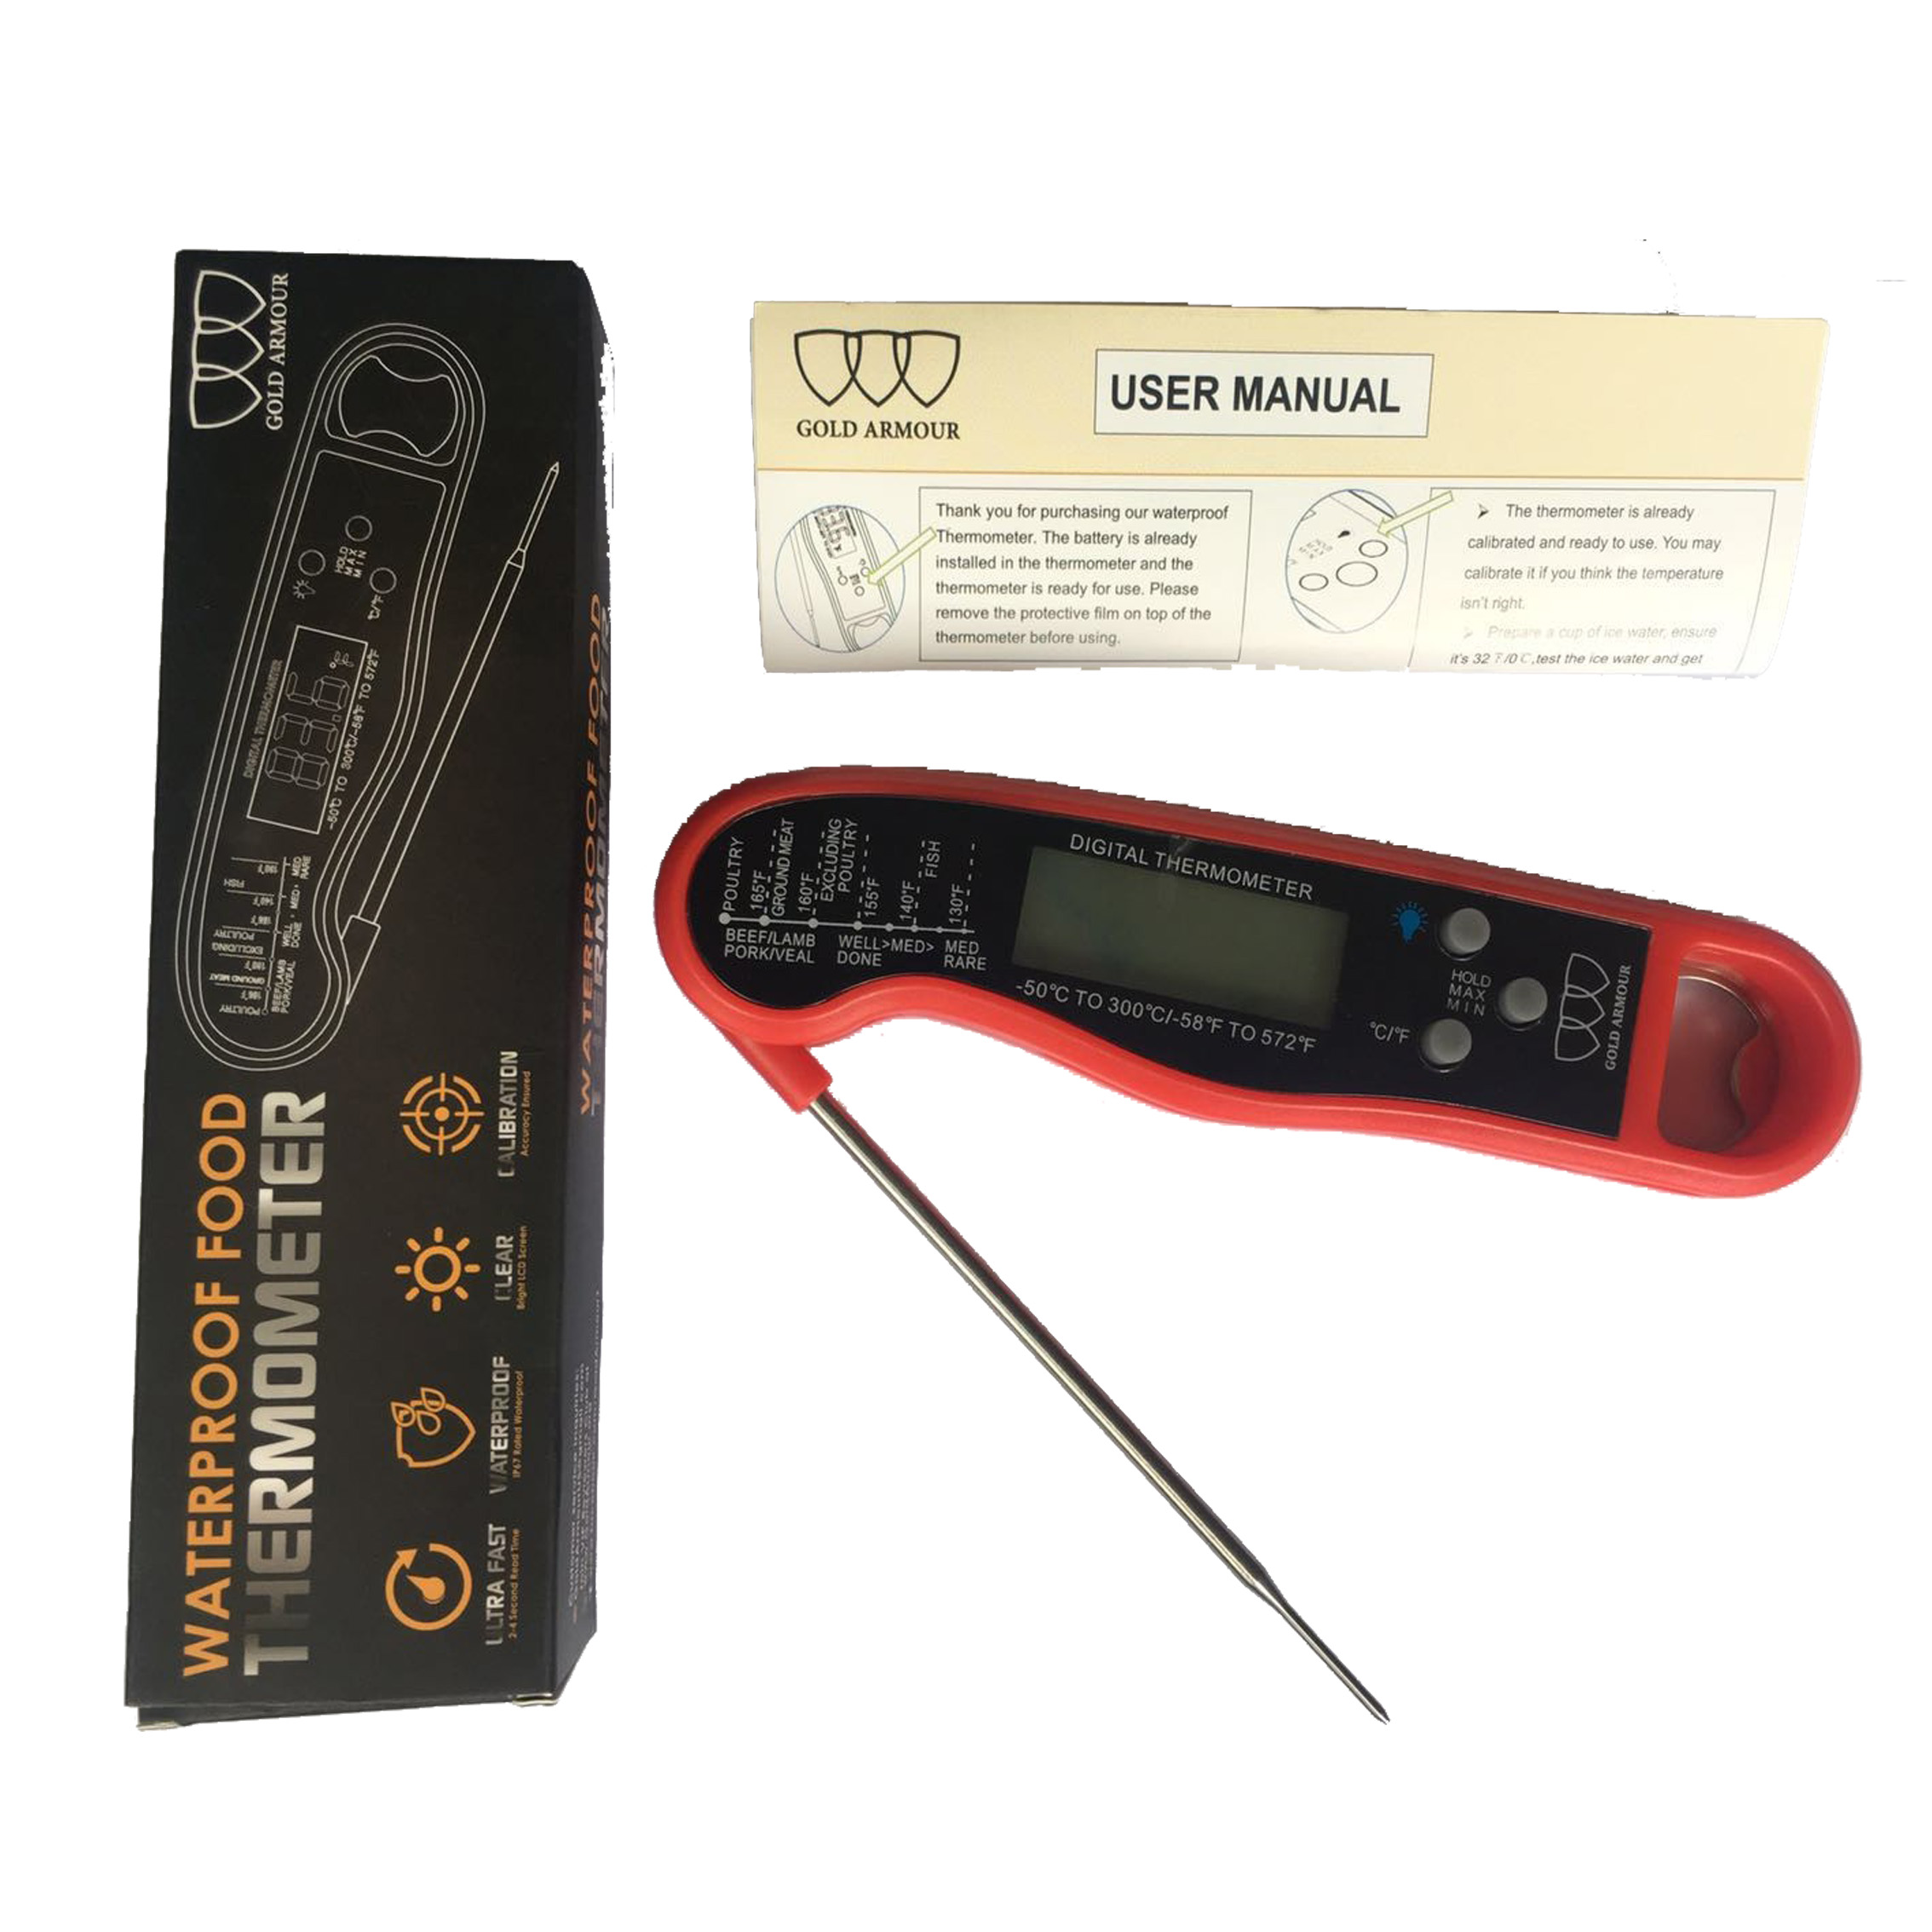 1pc, Digital Meat Thermometer, Instant-Read Food Temperature Thermometers,  Probe With Magnet Calibration Thermometer, Waterproof Thermometers For Kitc